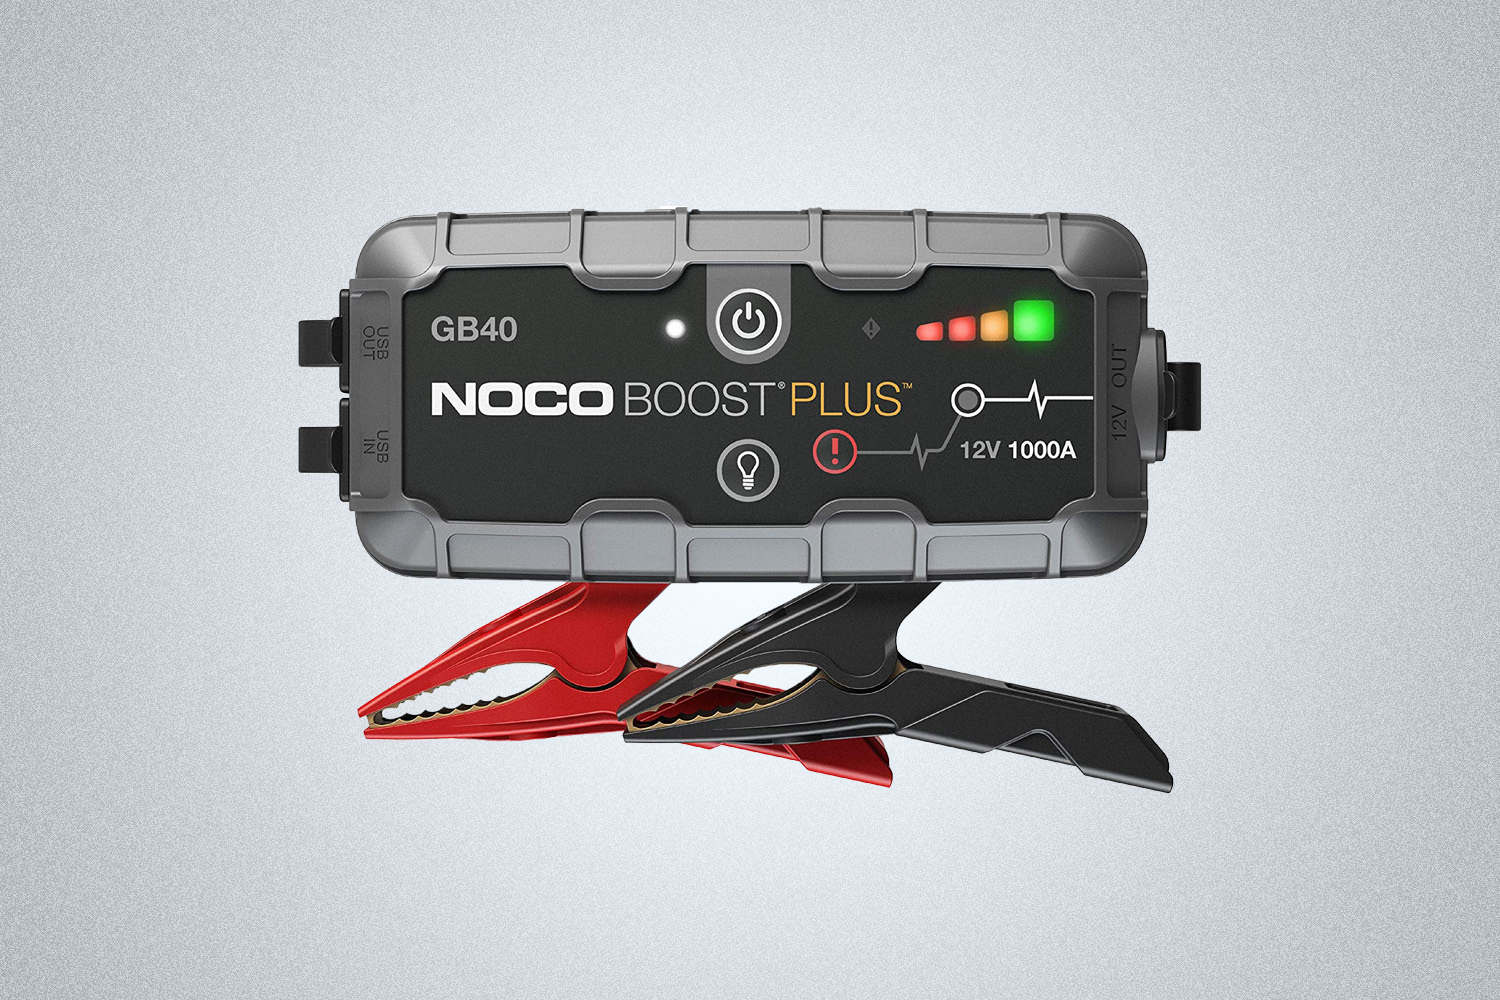 The NOCO Boost Plus Jump Starter Box is perfect for jump starting your car in winter emergencies in 2022